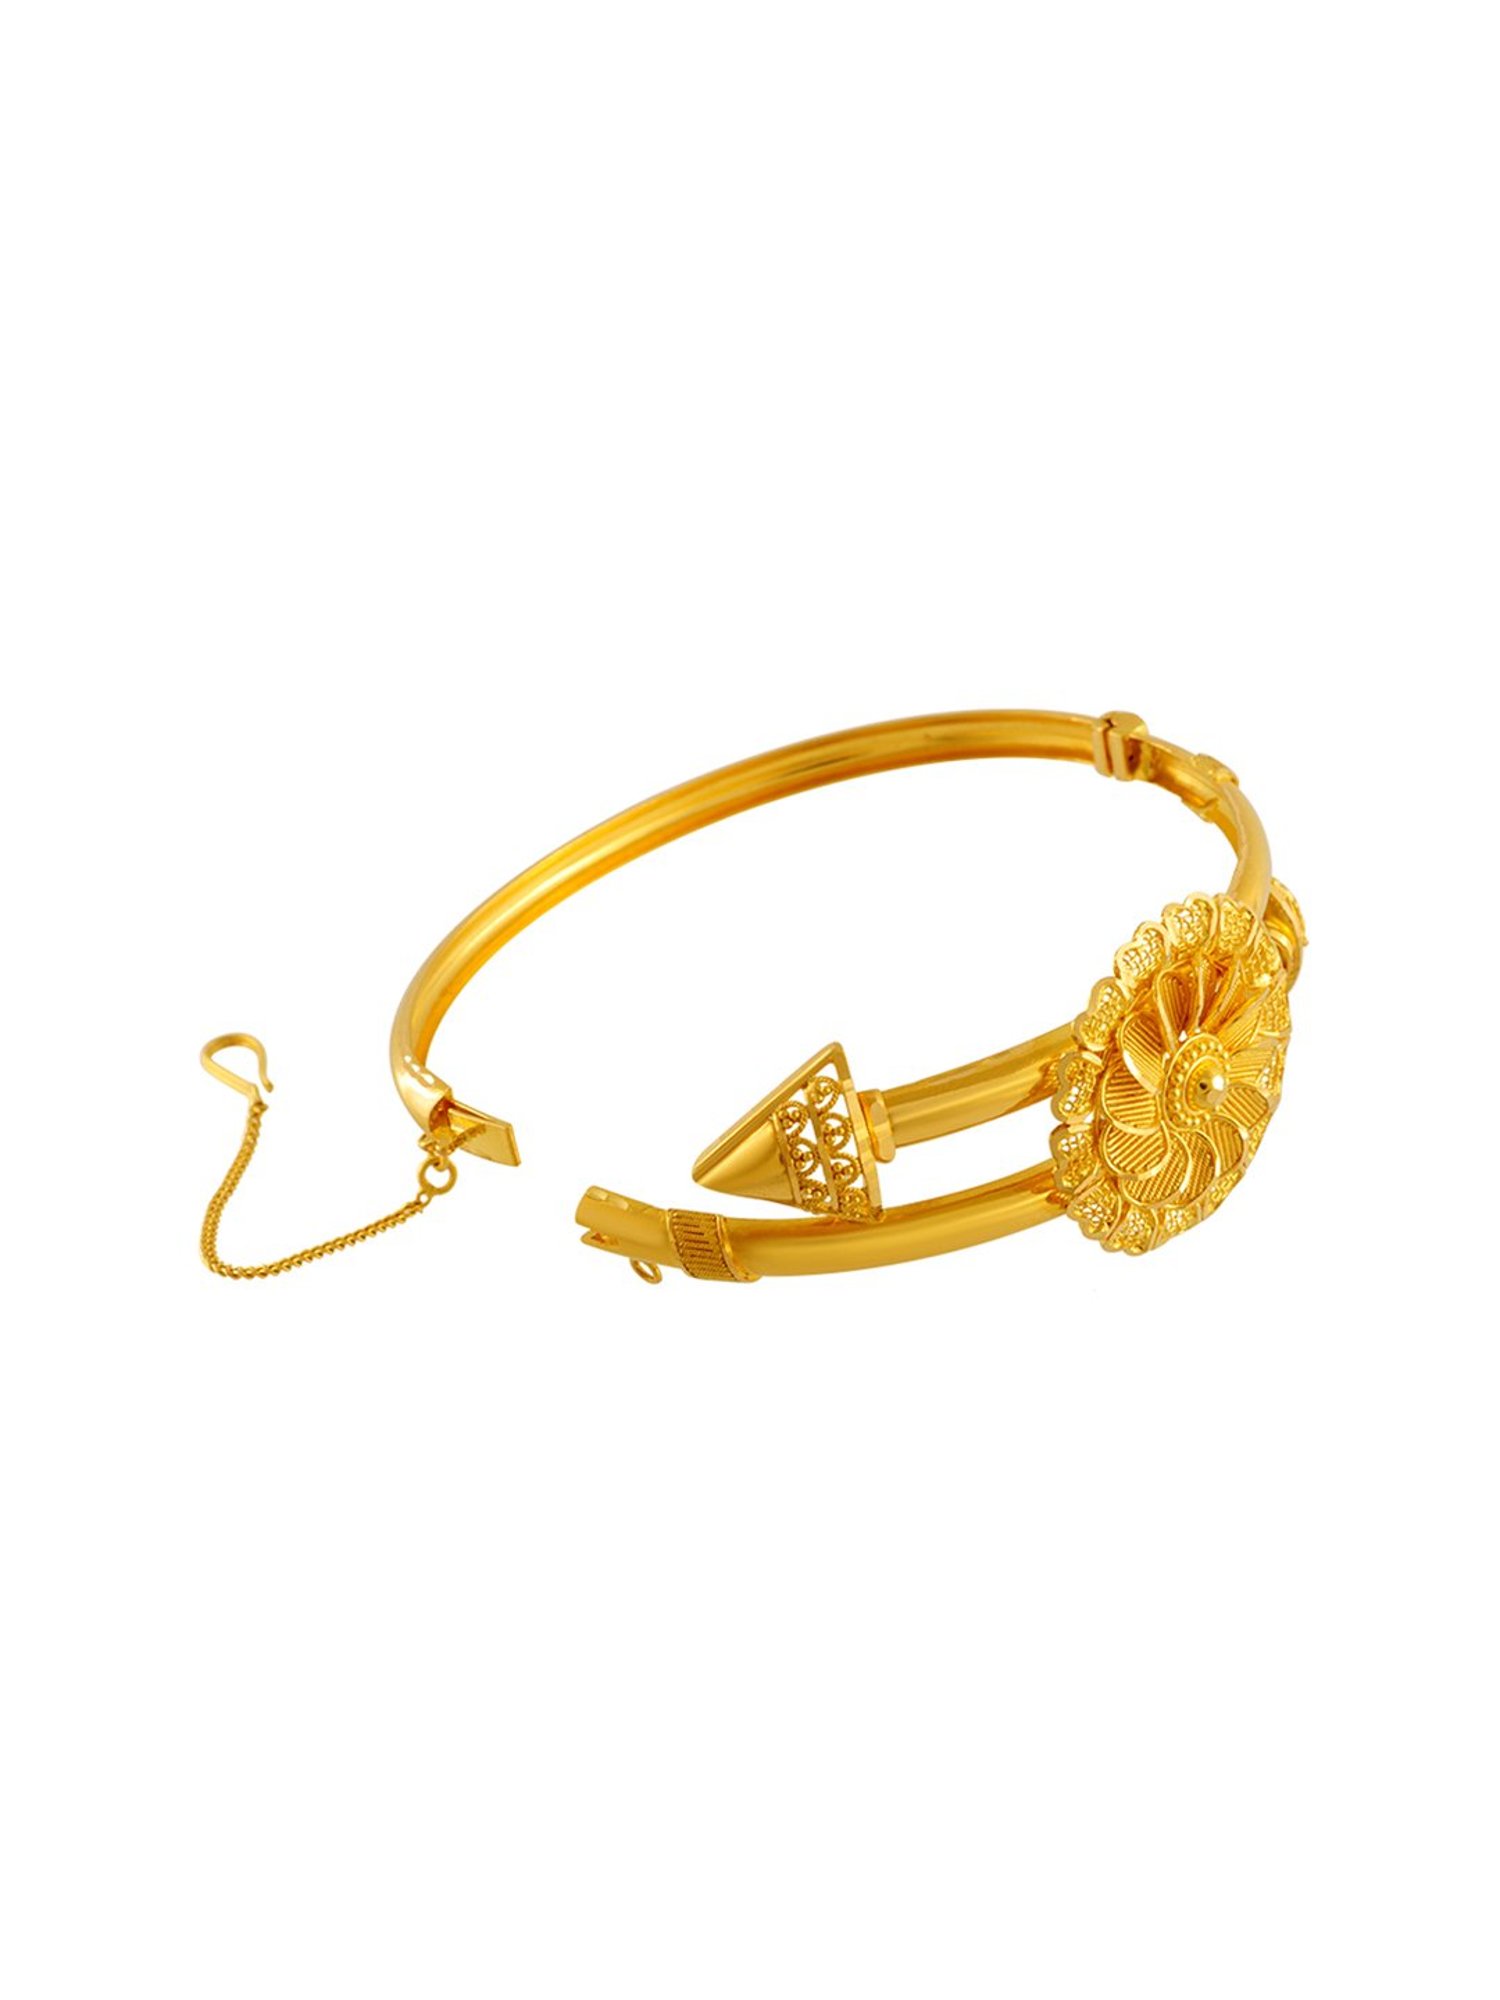 P.C. Chandra Jewellers 18KT (750) Yellow Gold Online Exclusive Bracelet for  Women and Girls - 2.1 Grams : Amazon.in: Fashion